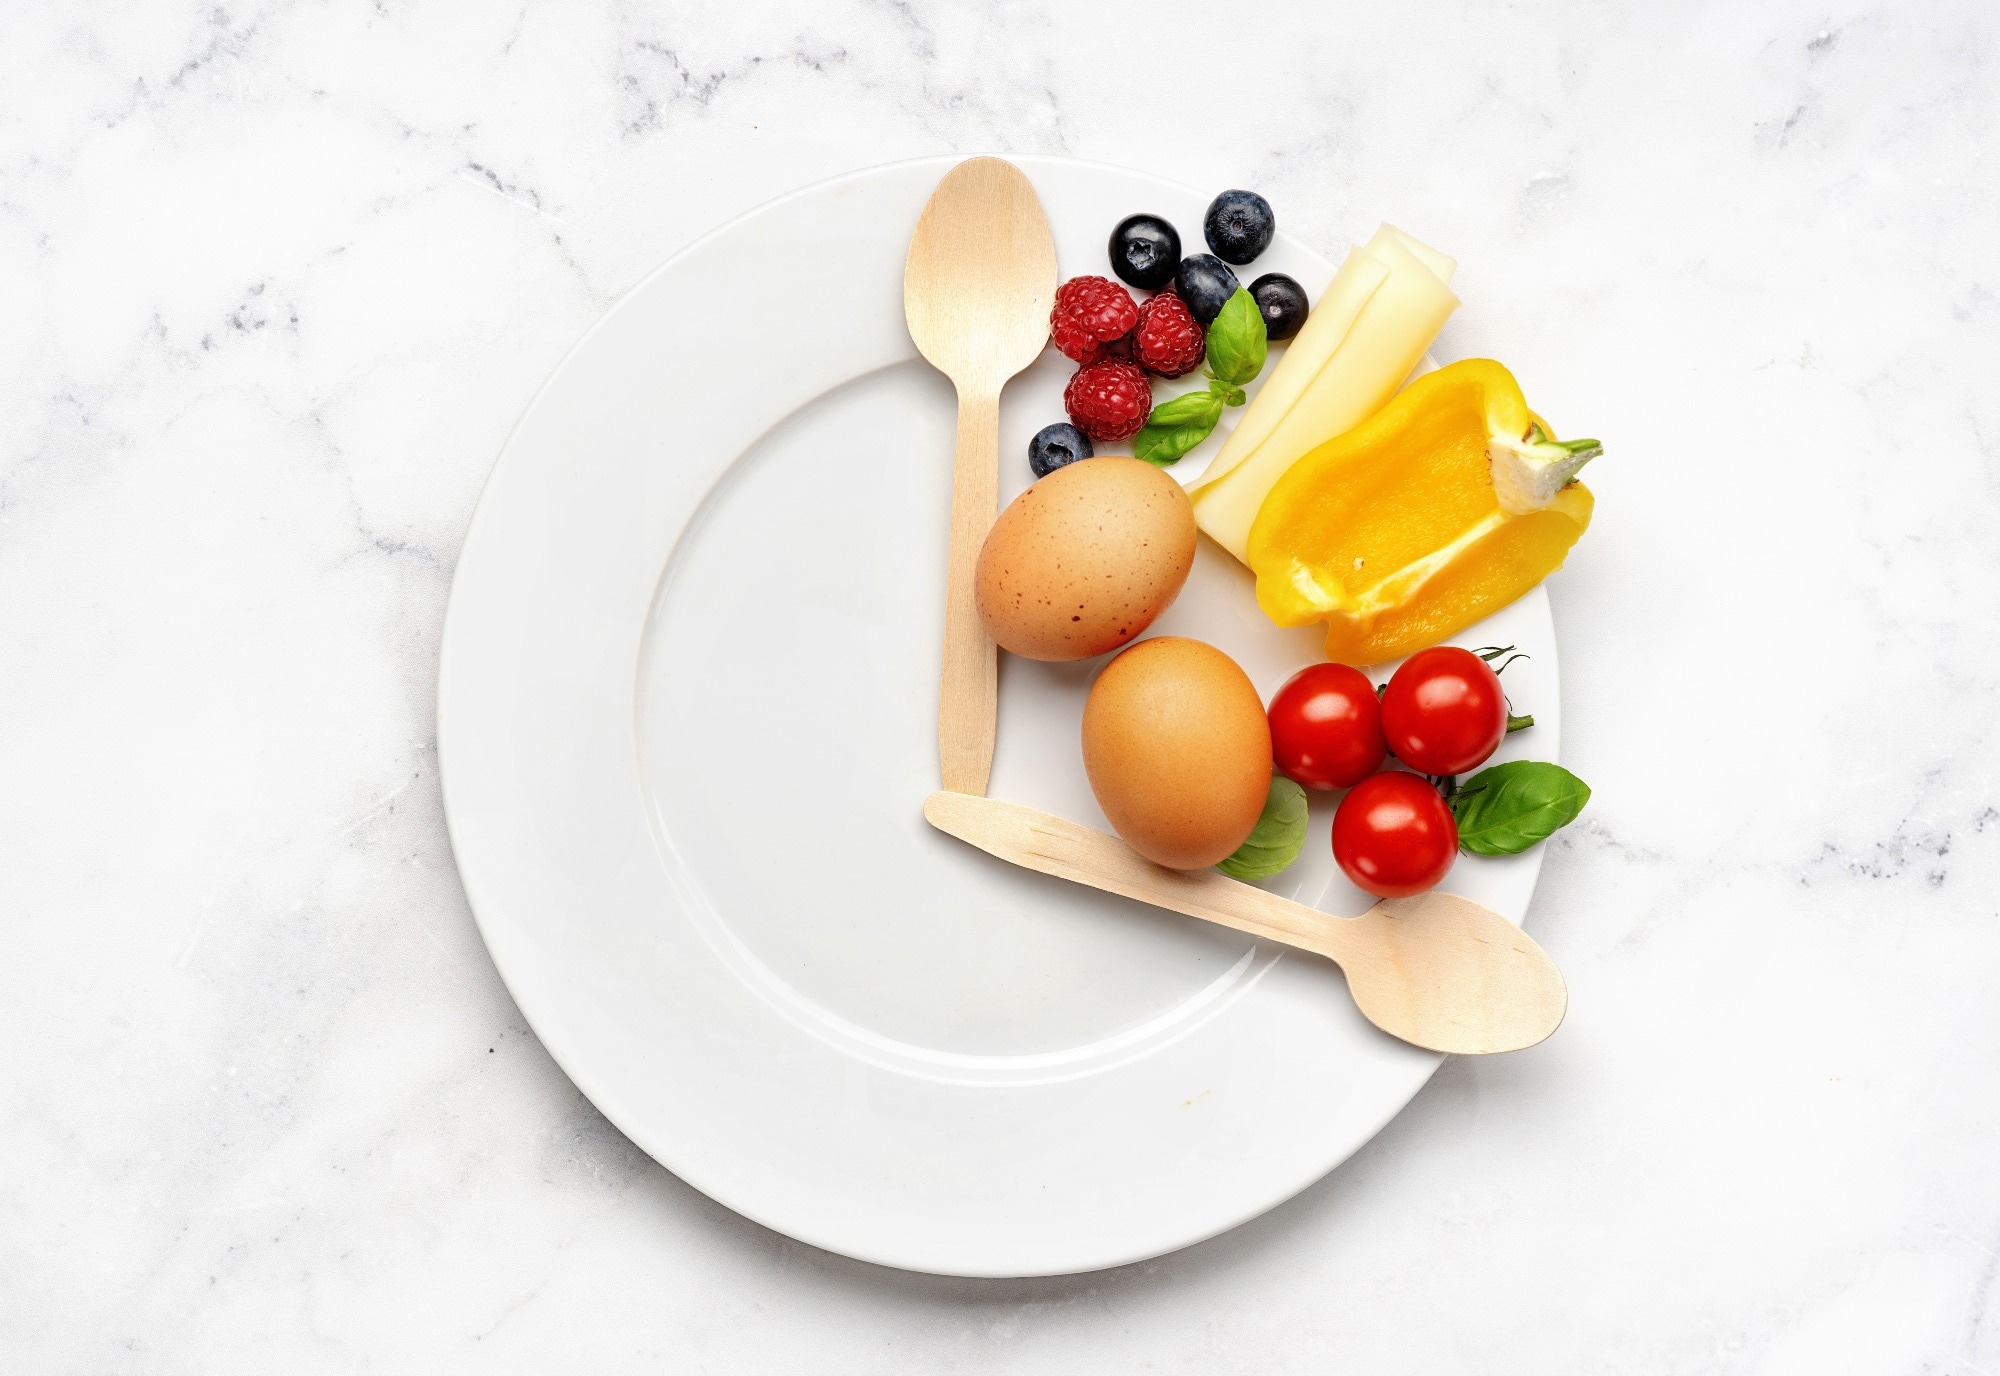 Accepted manuscript: Intermittent Fasting and Bone Health: A Bone of Contention?  Image Credit: Kattecat/Shutterstock